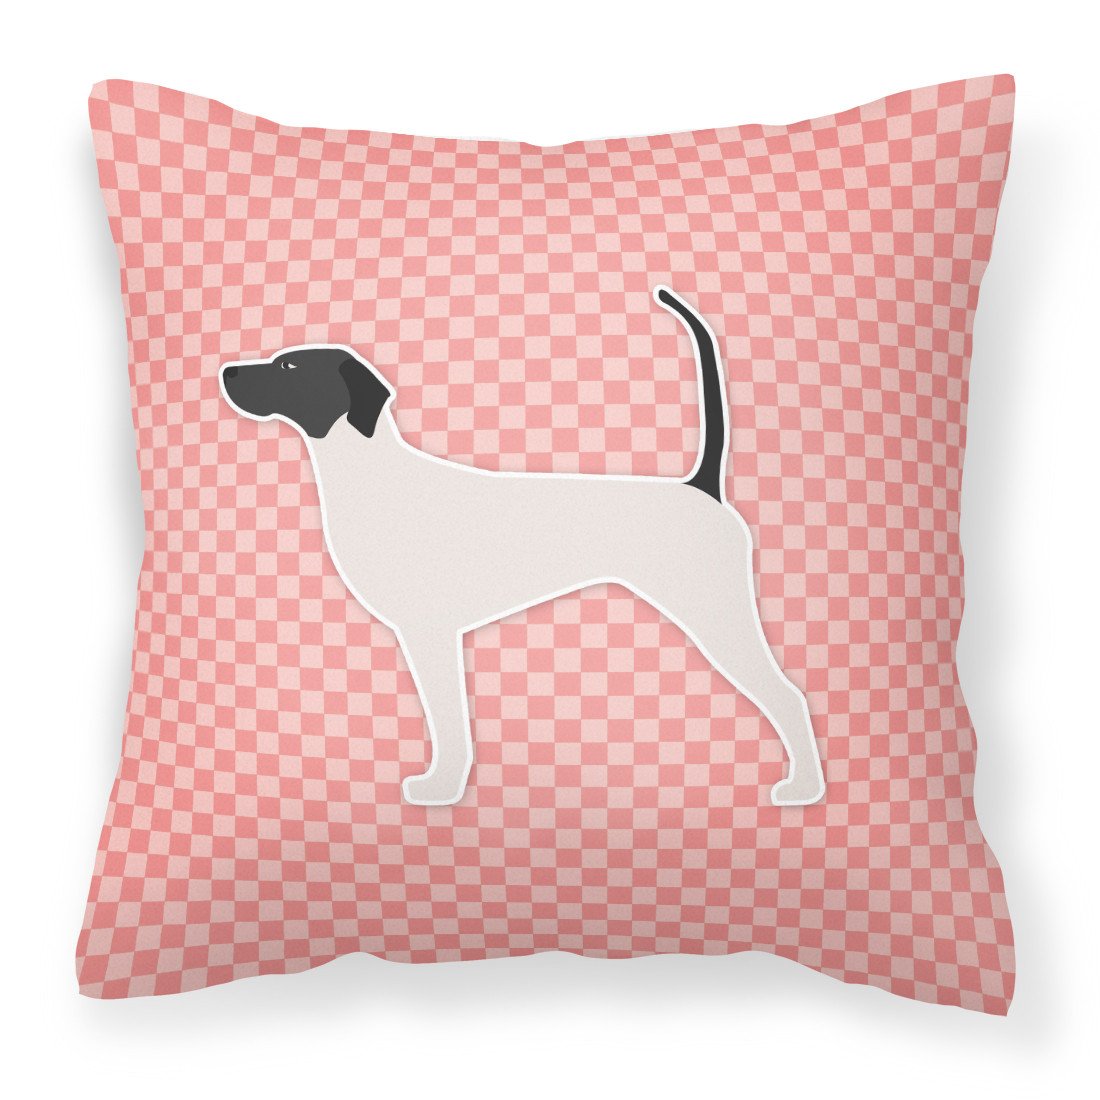 English Pointer Checkerboard Pink Fabric Decorative Pillow BB3595PW1818 by Caroline's Treasures